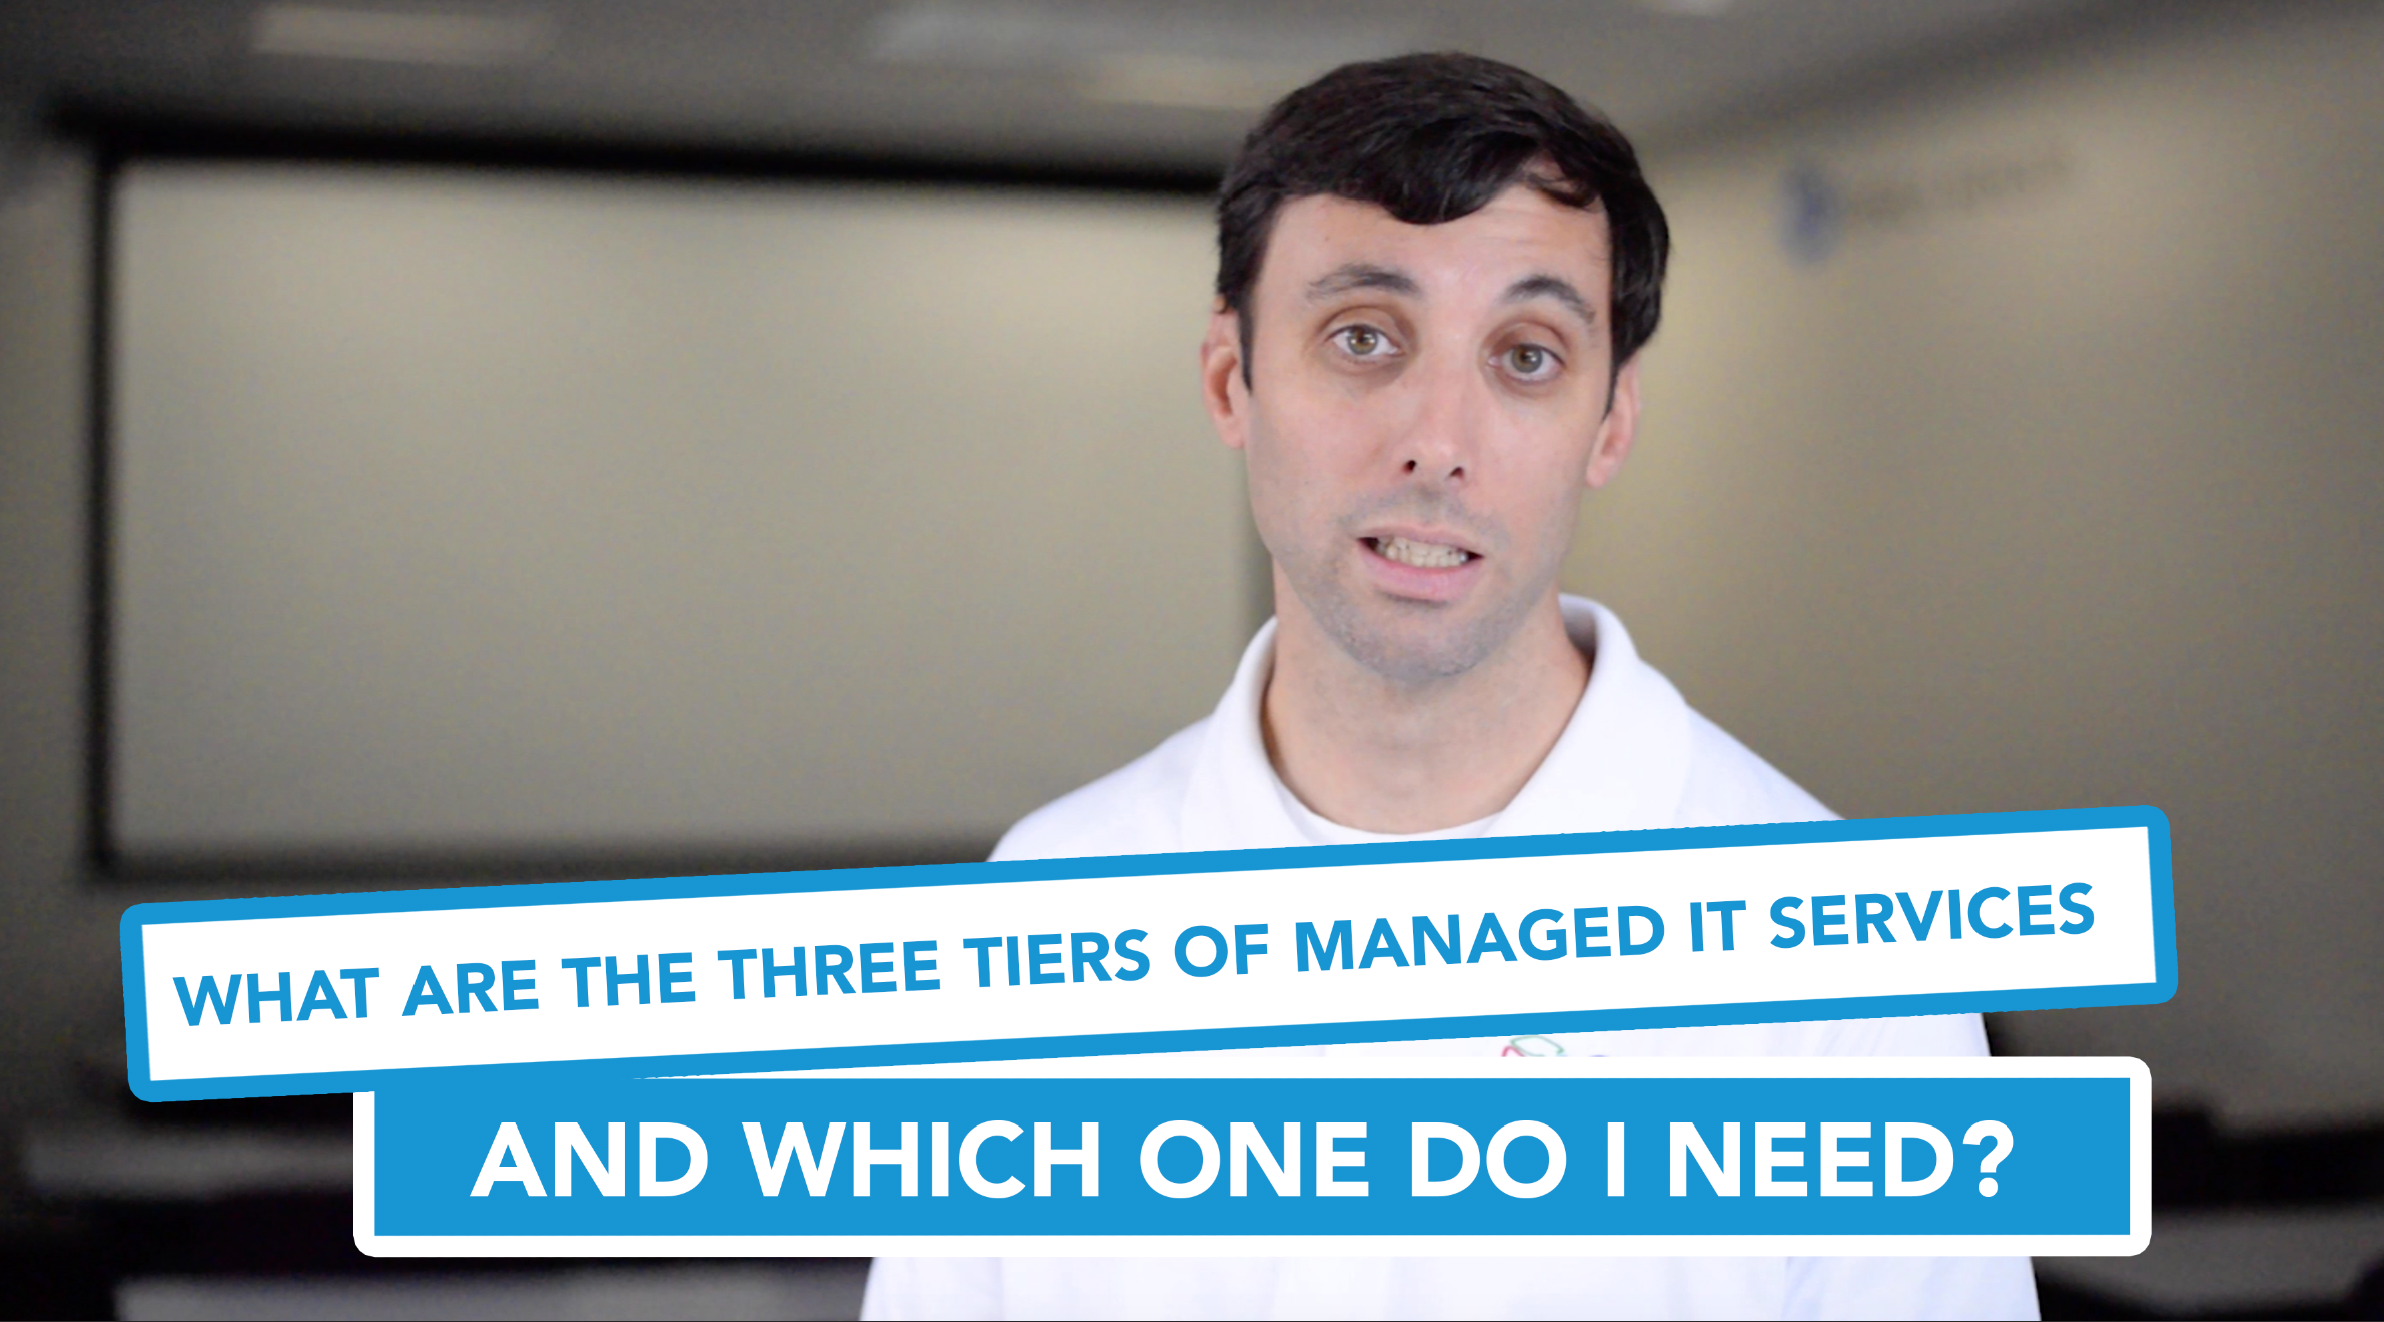 What Are the Three Tiers of Managed IT Services, and Which One Do I Need